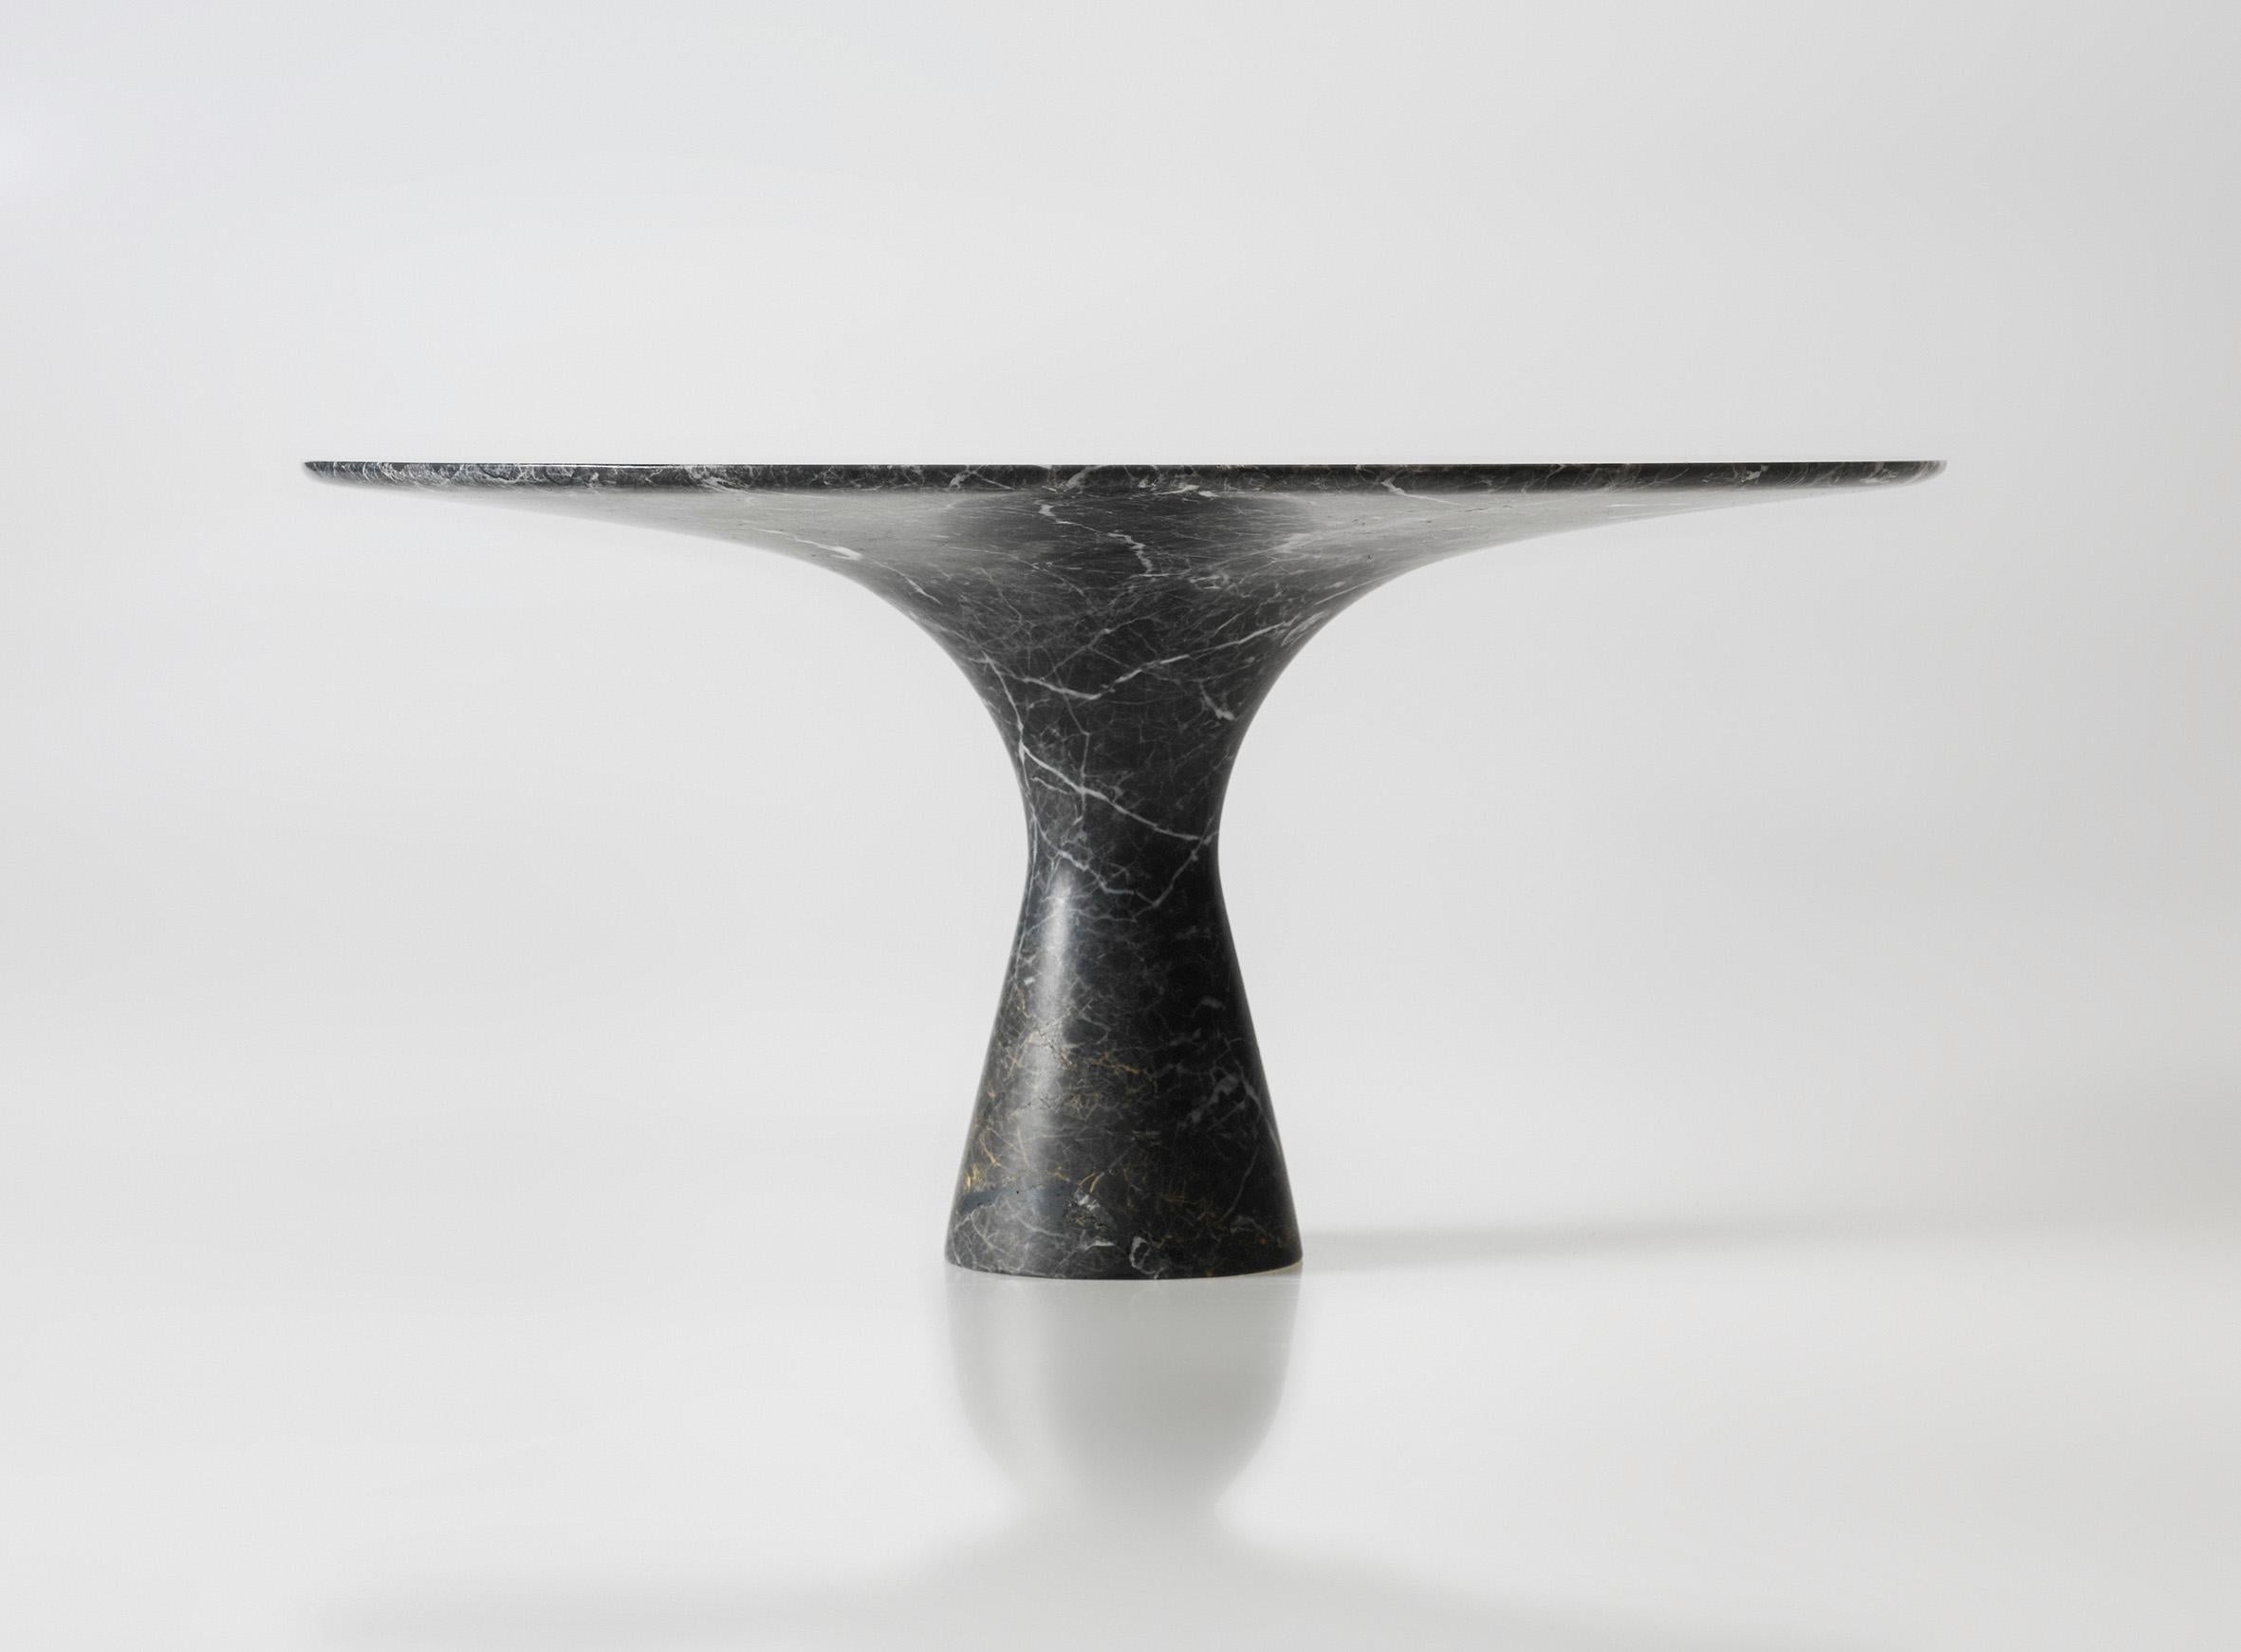 Grey Saint Laurent refined contemporary marble dining table 250/75
Dimensions: 250 x 160 x 75 cm
Materials: Grey Saint Laurent marble.

Angelo is the essence of a round table in natural stone, a sculptural shape in robust material with elegant lines